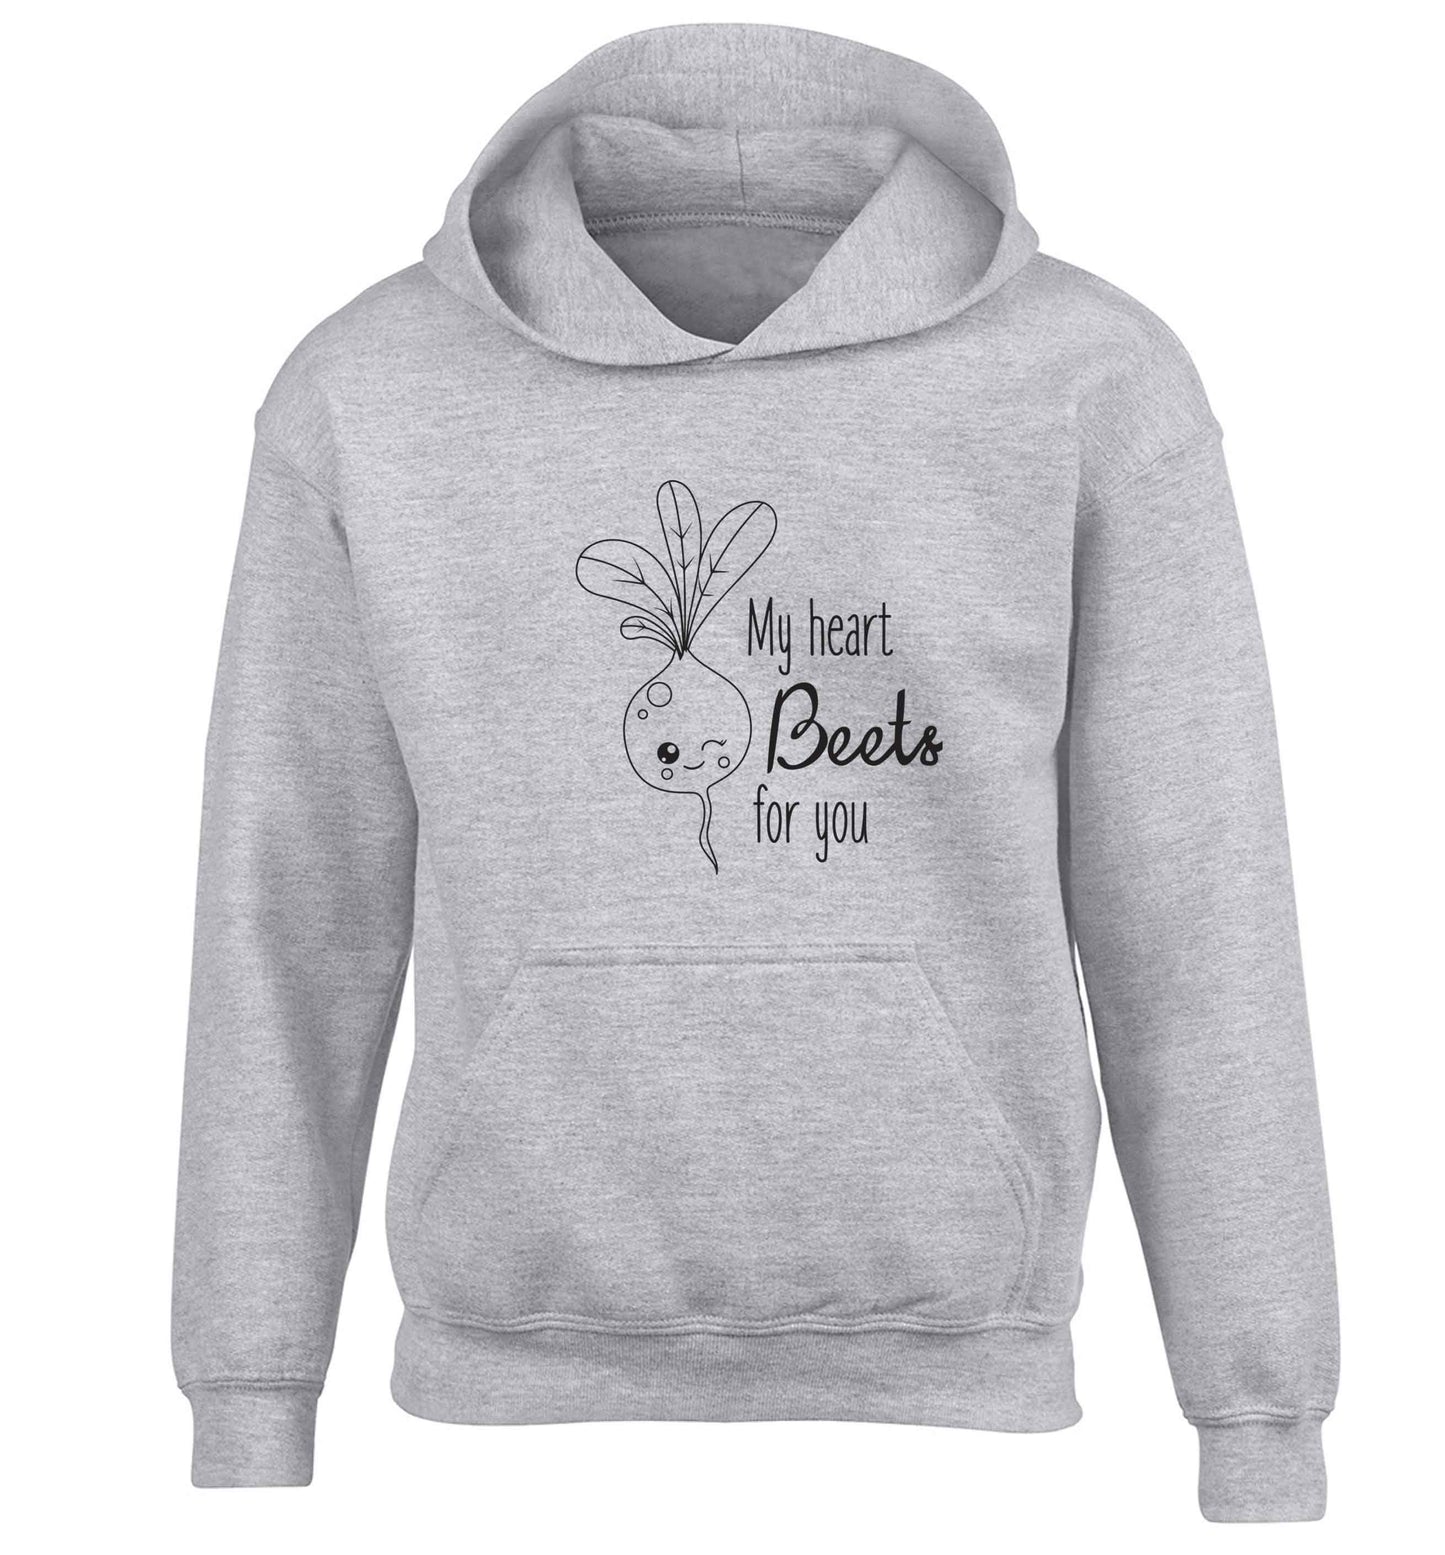 My heart beets for you children's grey hoodie 12-13 Years